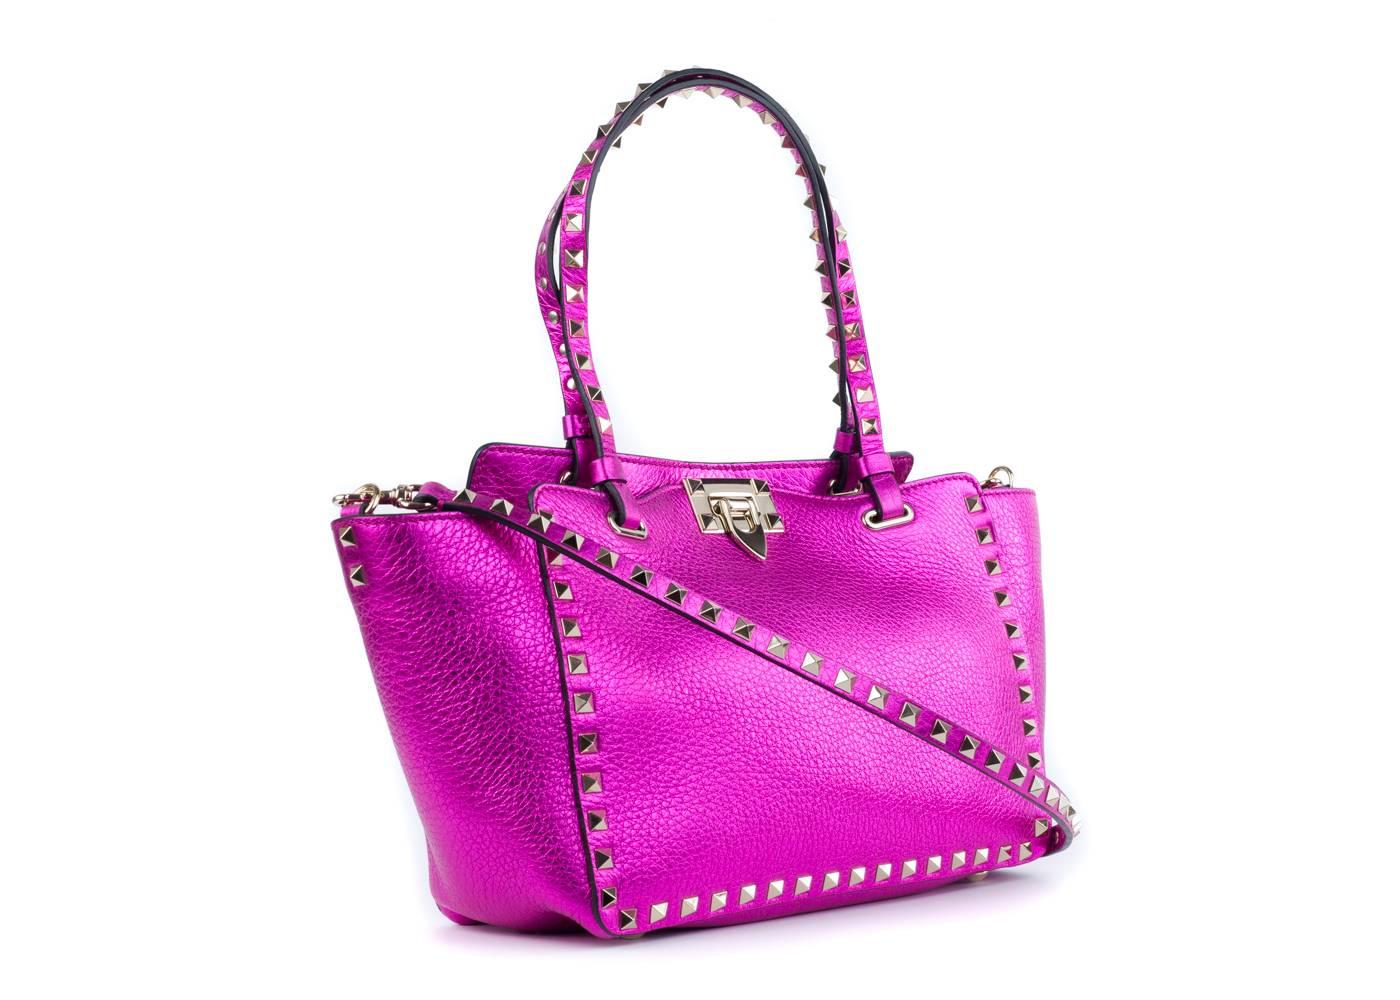 Brand New Valentino Tote Bag
Original Box & Dust Bag Included
Retails in Stores & Online for $2295
Considered as a size Small

The iconic rockstud trapeze tote from valentino takes on a dark pink hue for the new collection, adding glamorous verve to